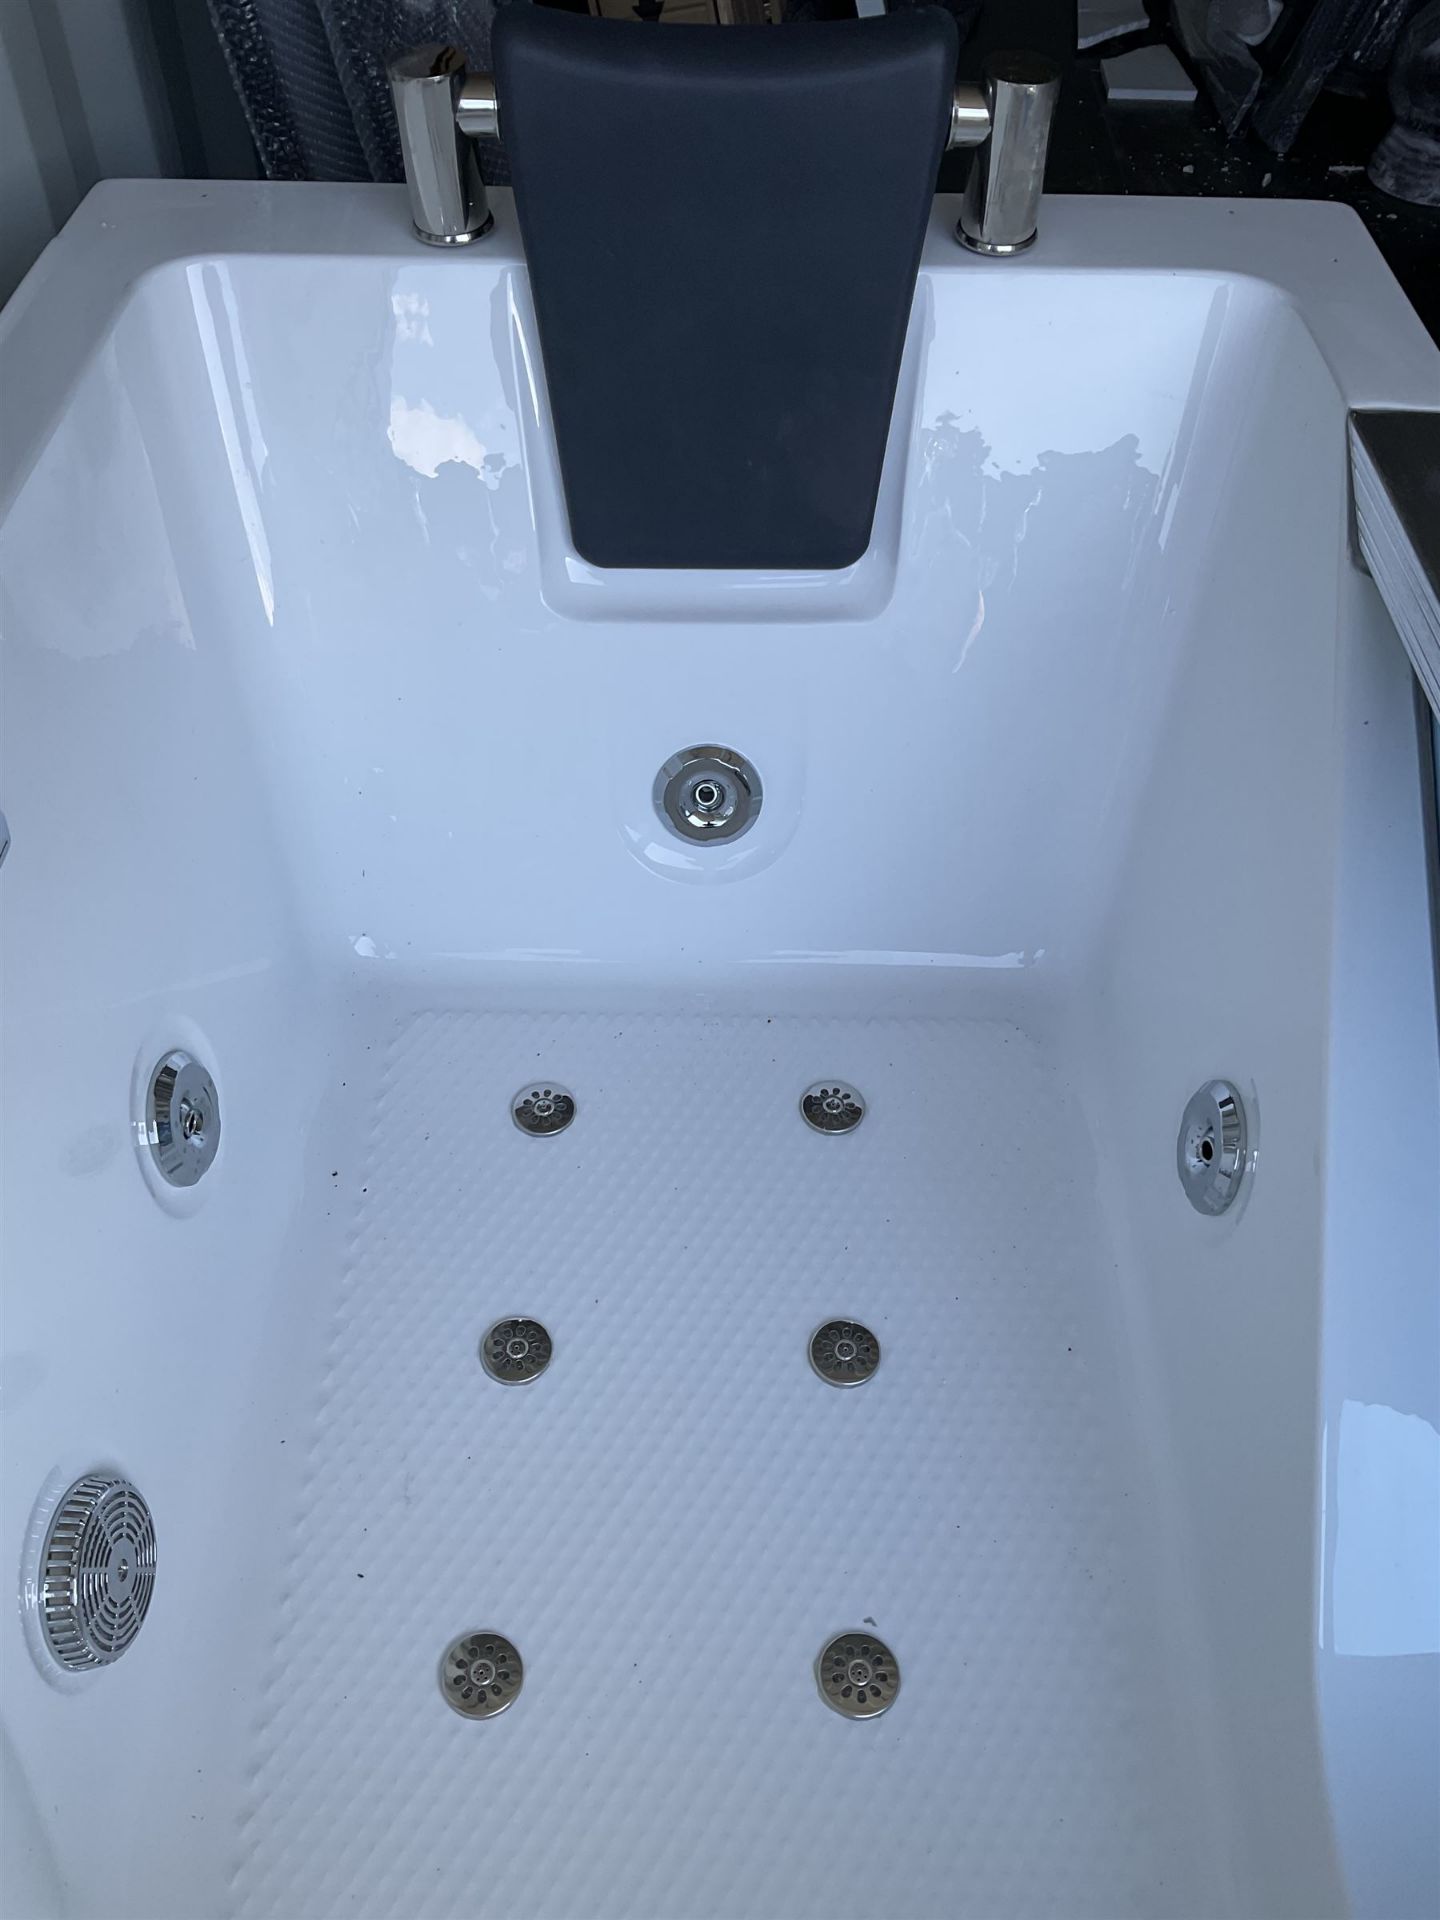 Jacuzzi bath with surround glass panels - Image 5 of 12